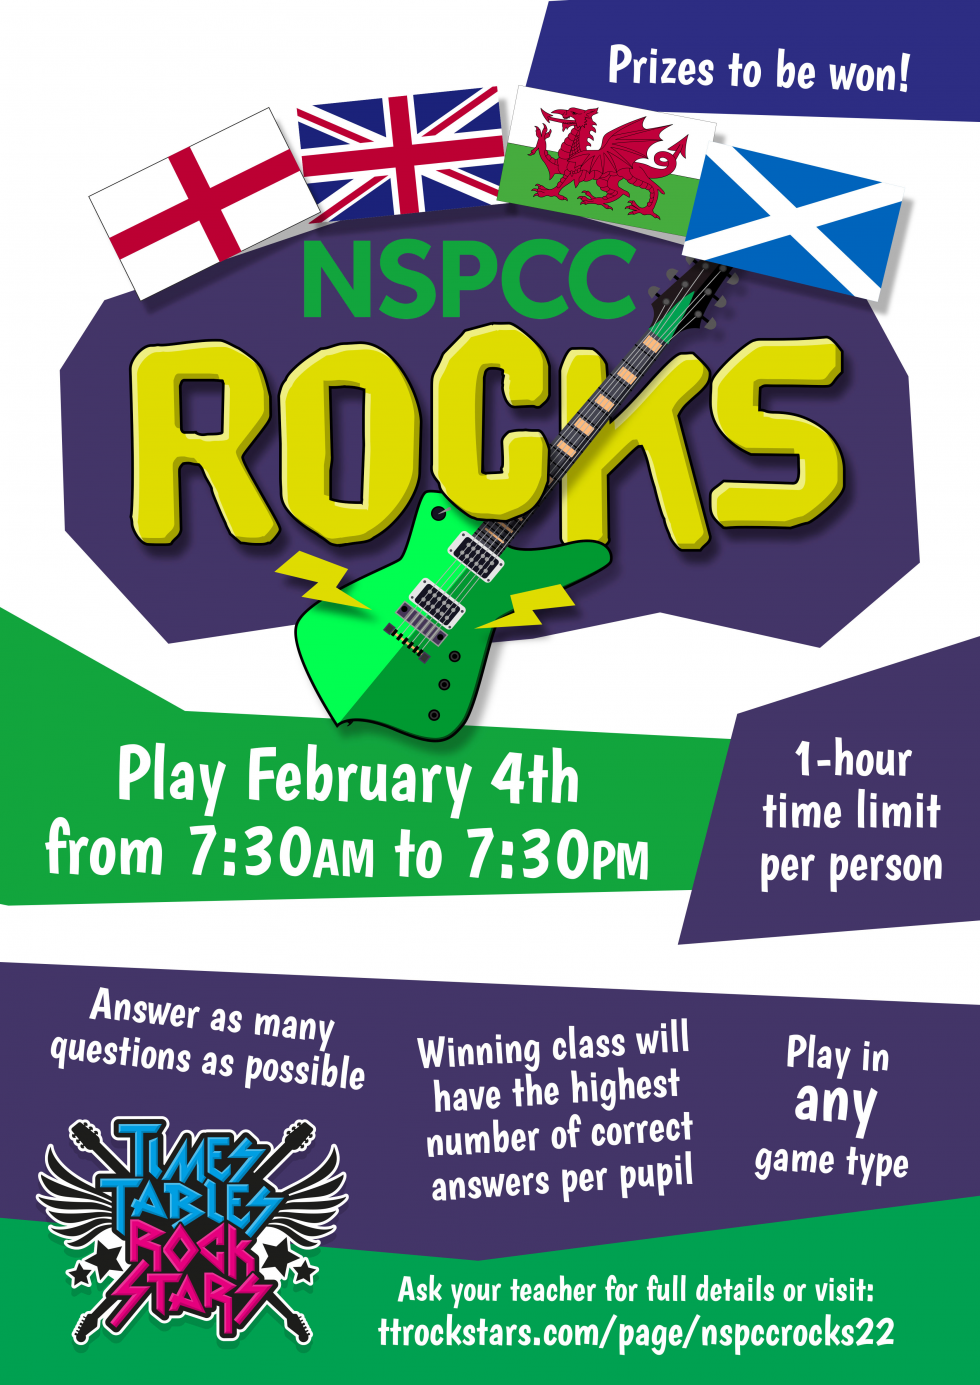 Download your NSPCC Rocks Poster now.